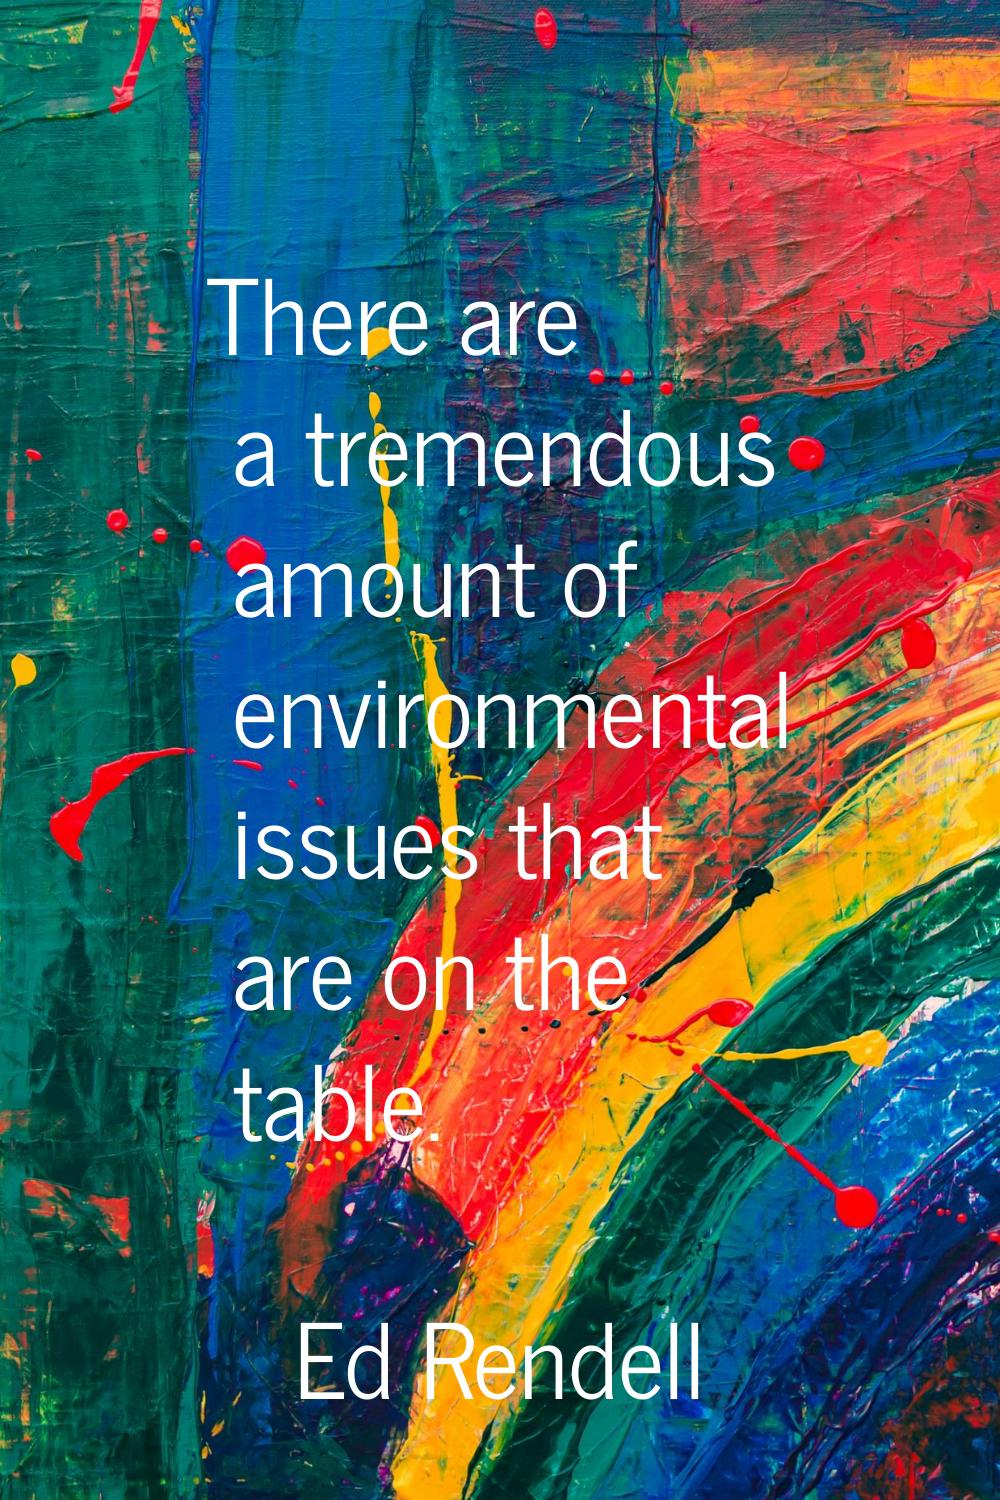 There are a tremendous amount of environmental issues that are on the table.